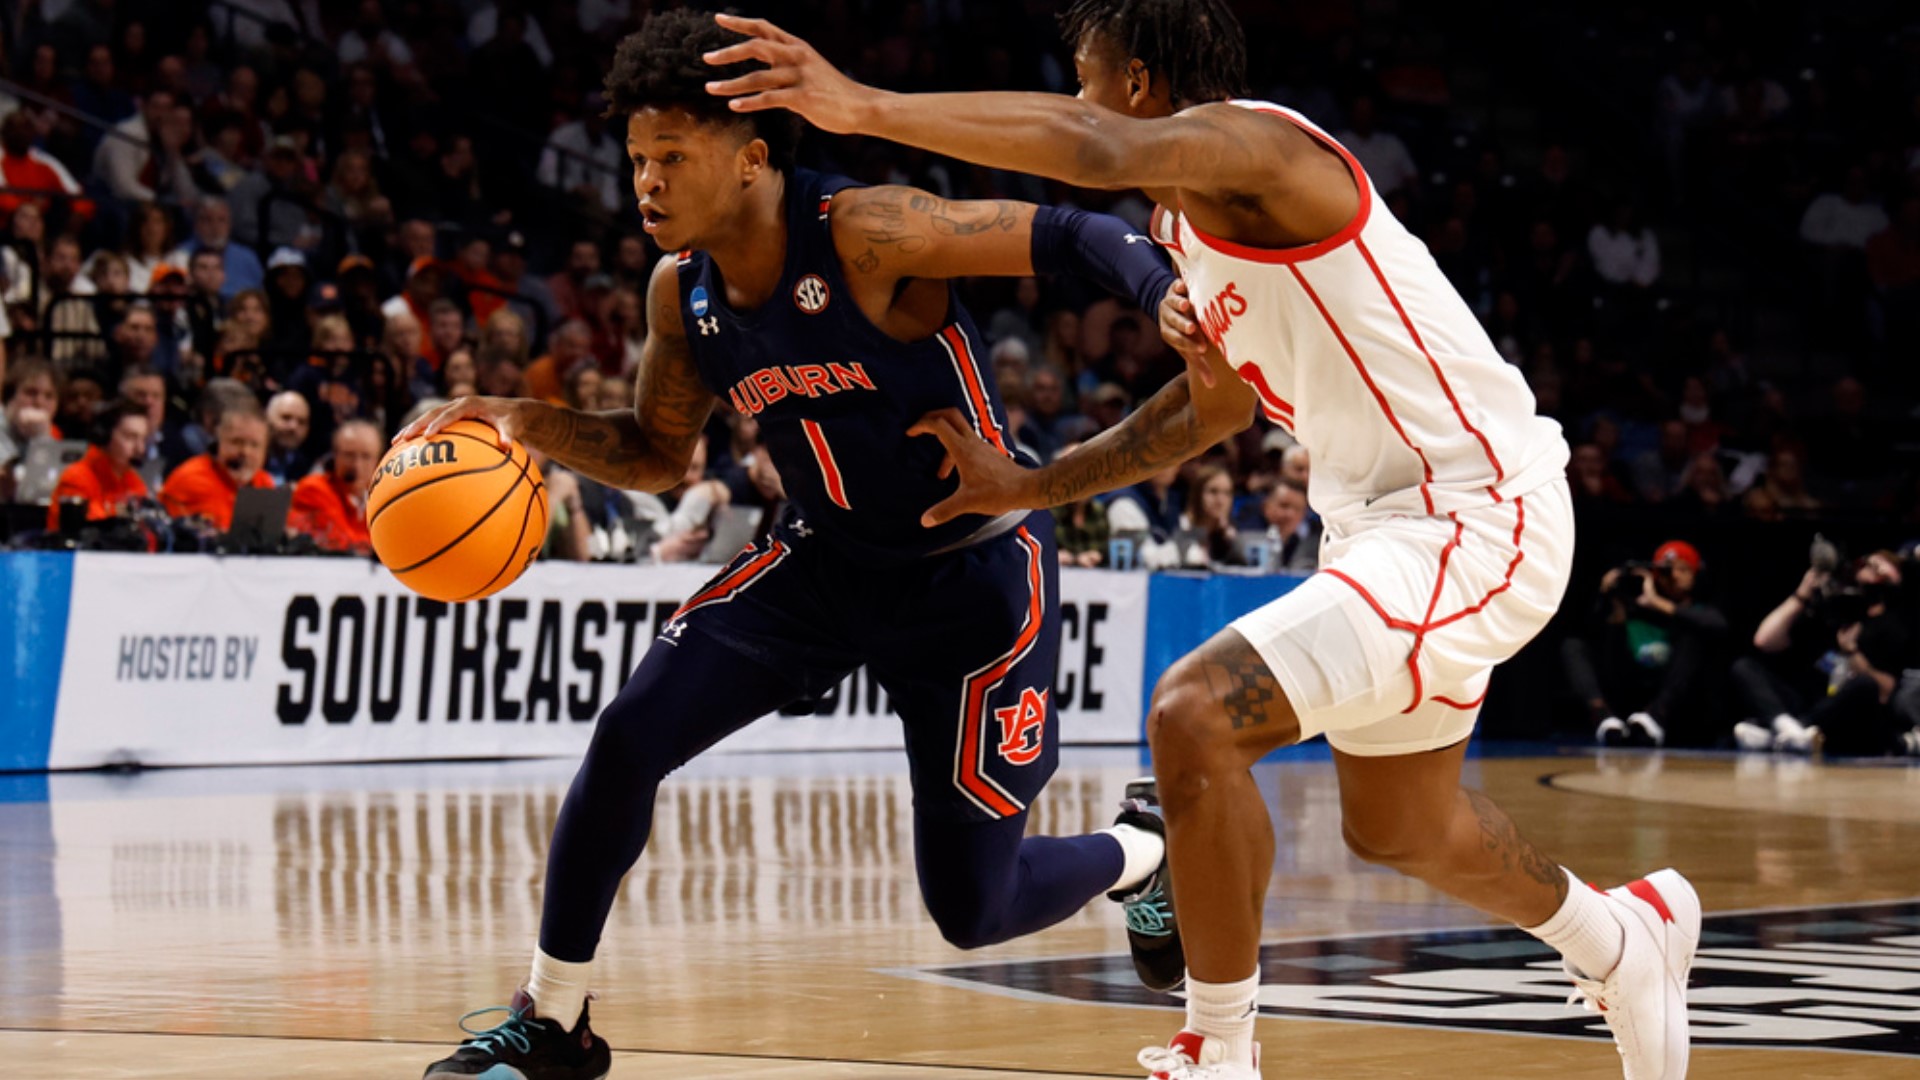 Auburn Tigers fall to Houston Cougars 81-64. Our Nick Kuzma and Simon report from Birmingham.